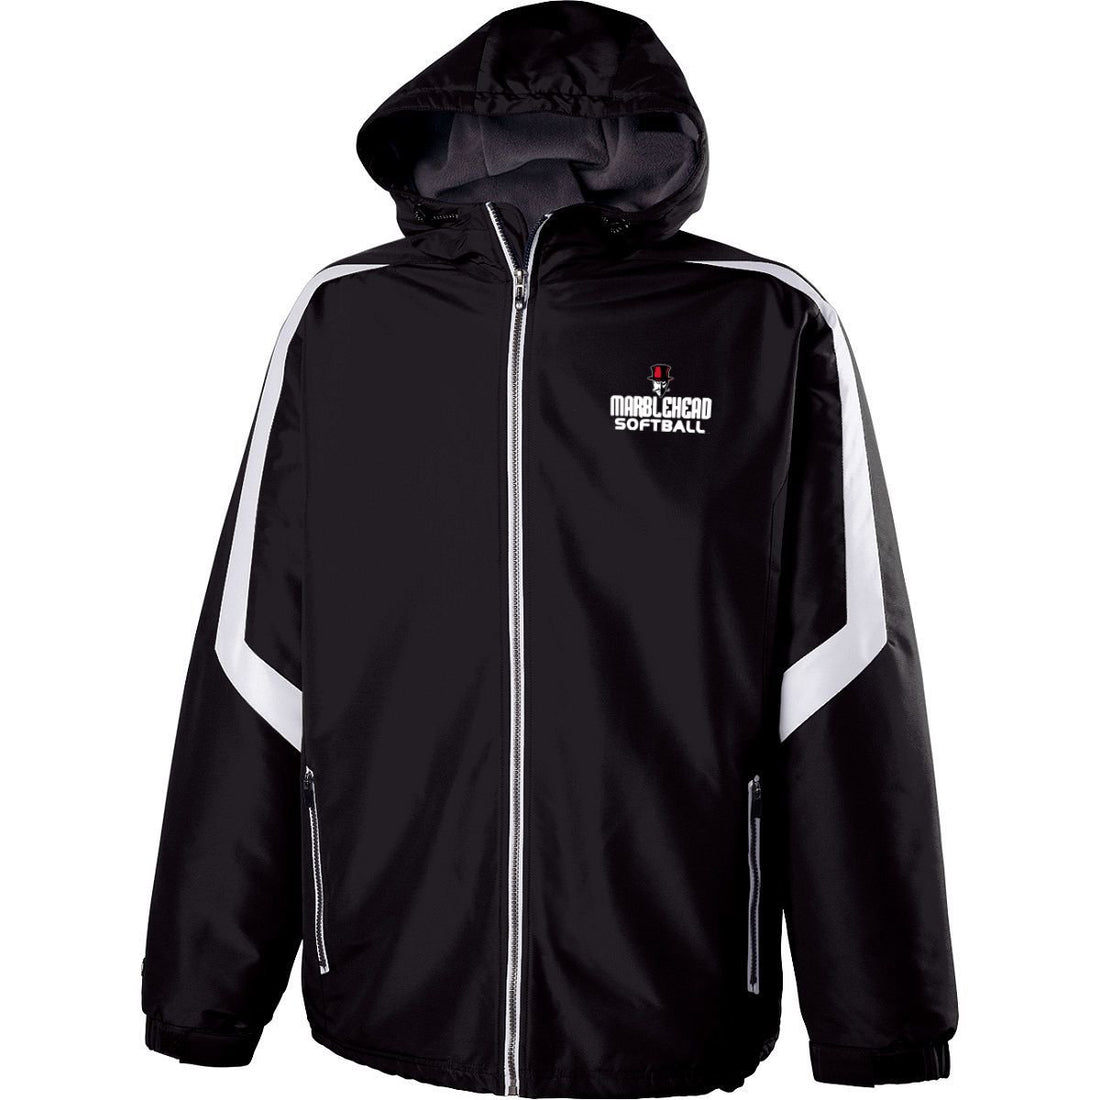 Marblehead Softball Charger Jacket